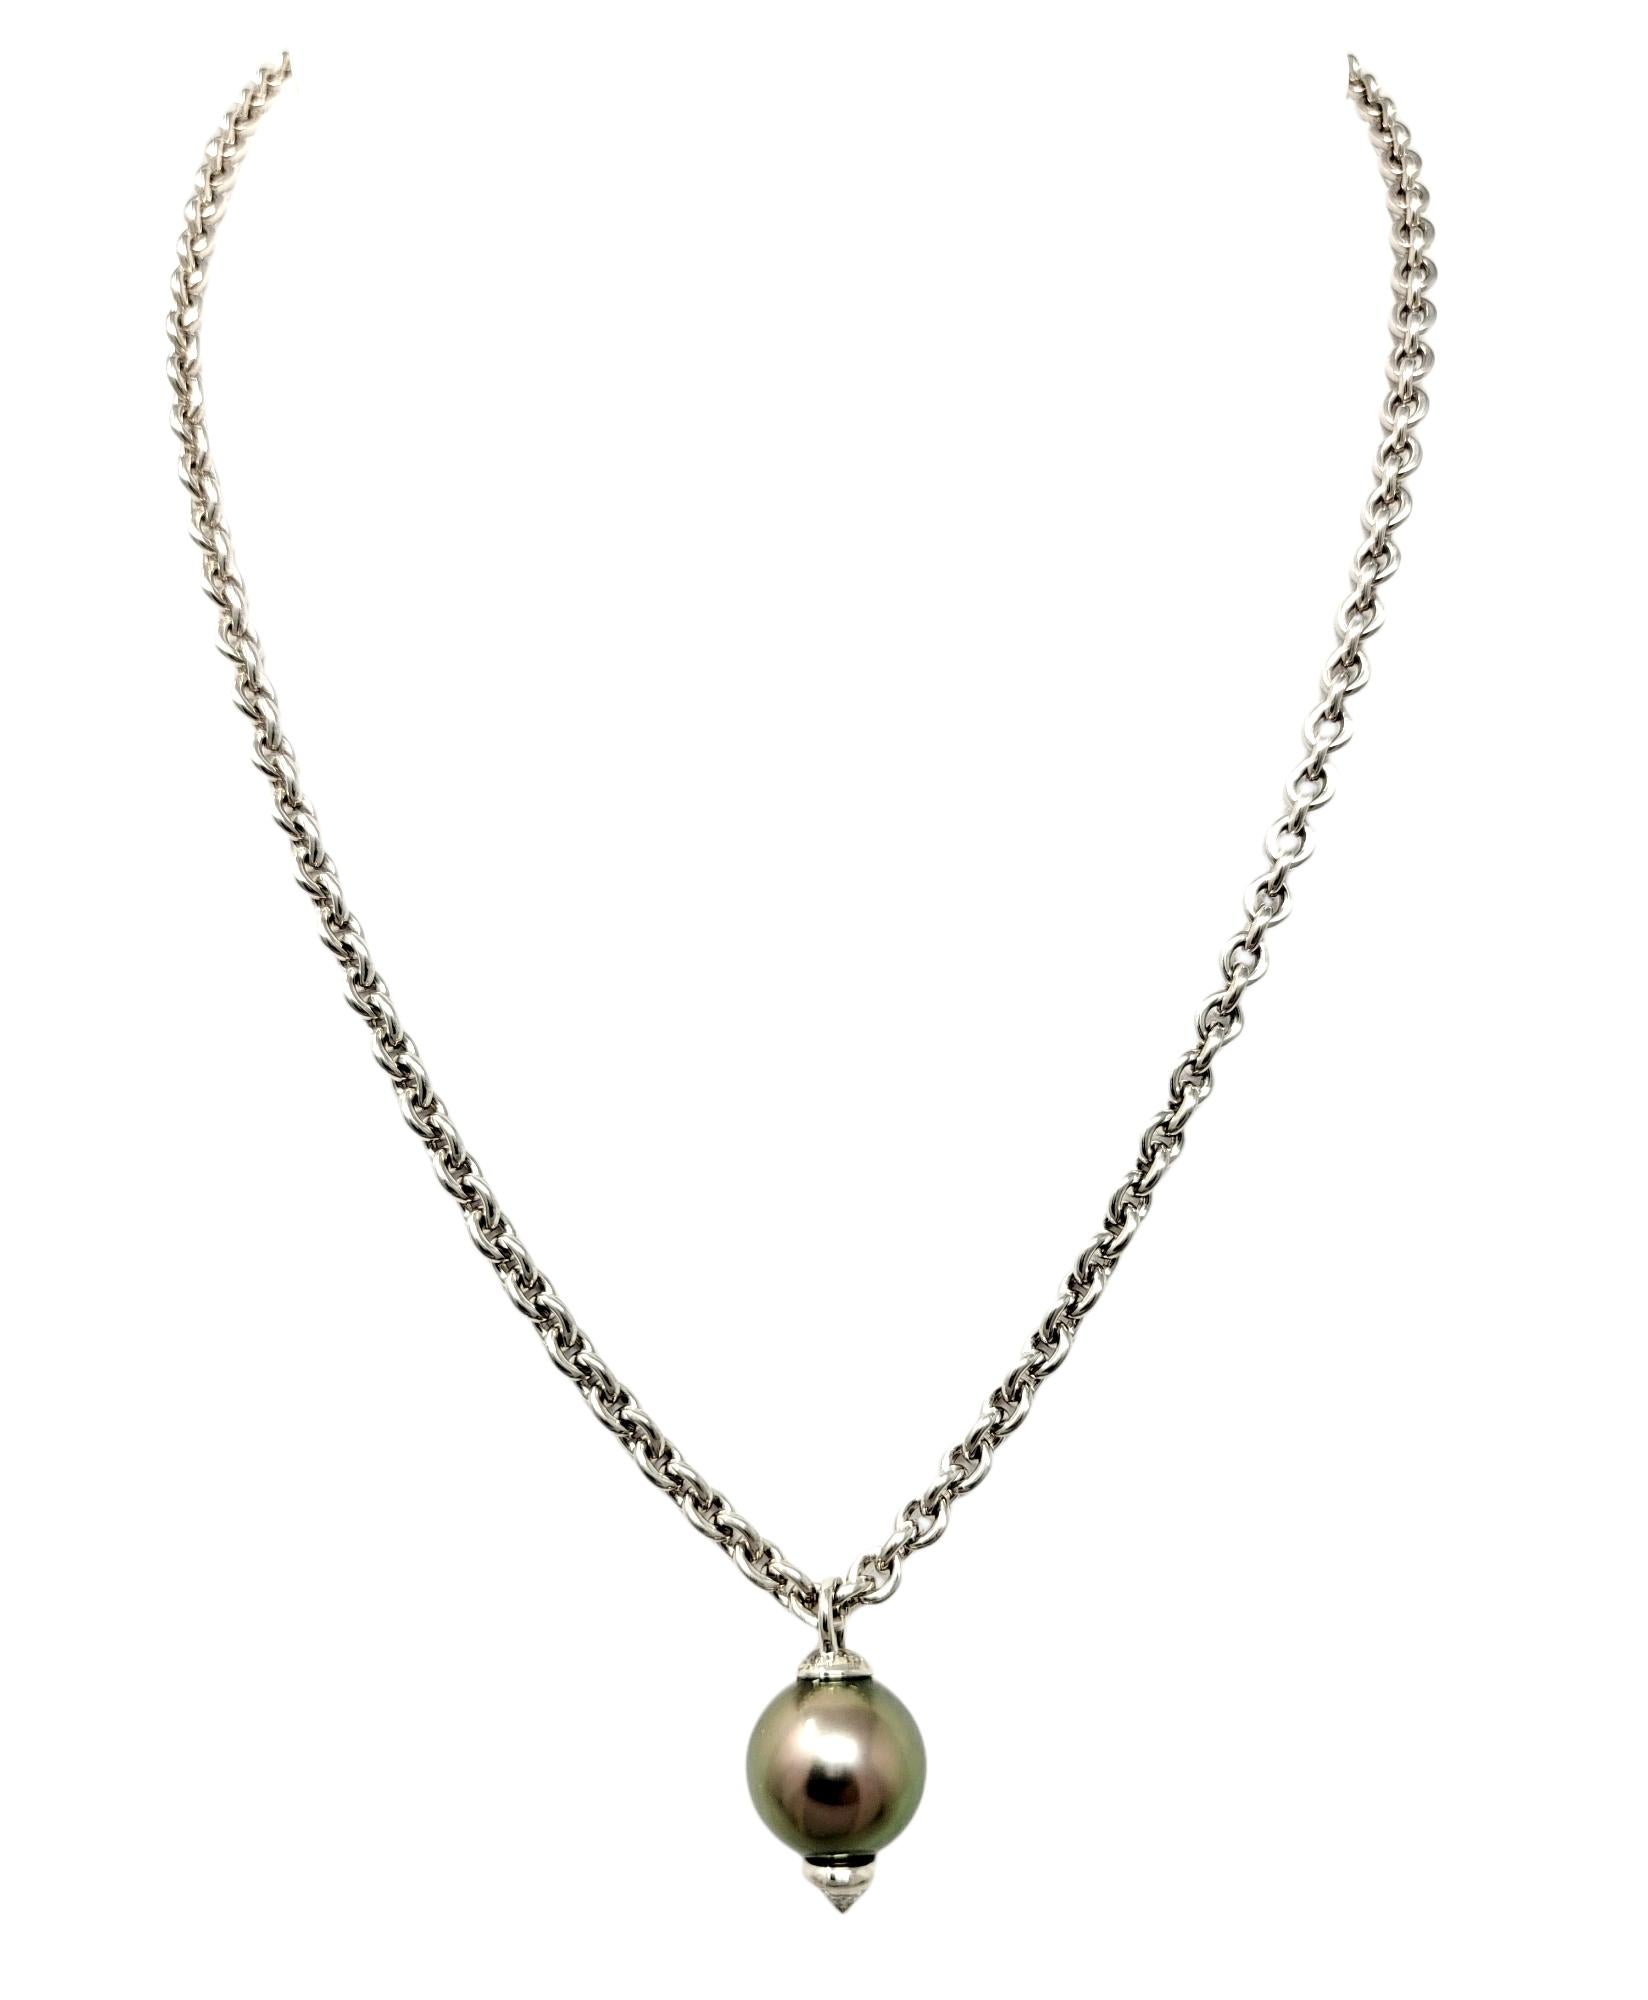 Tiffany & Co. Diamond and Cultured Tahitian Pearl Pendant Necklace in White Gold 2